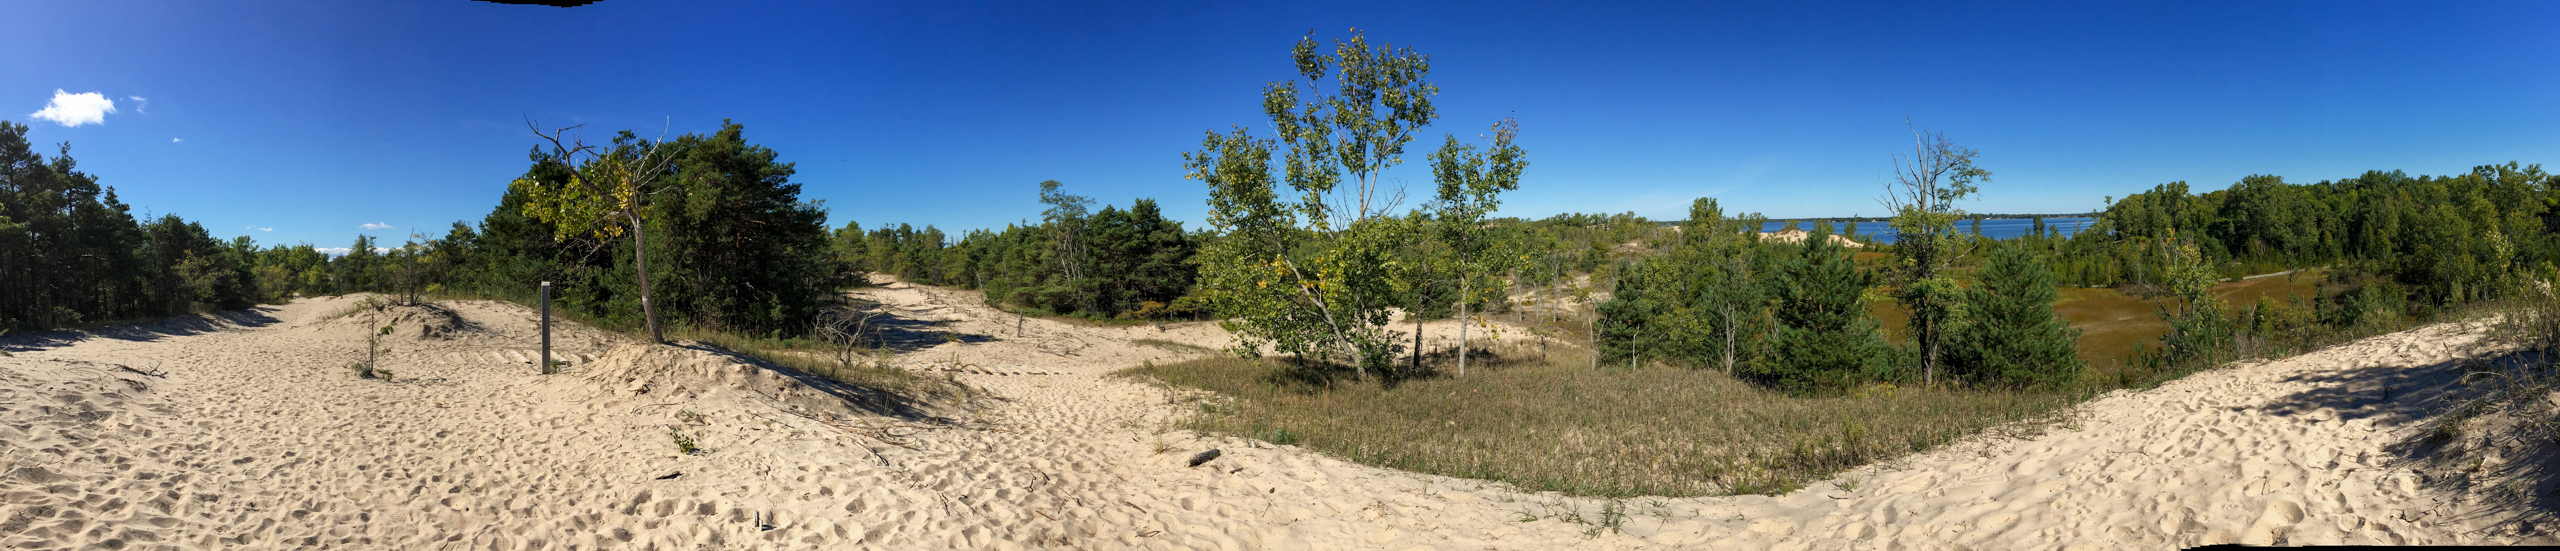 panoramic view of sand dunes with a small lake in the background